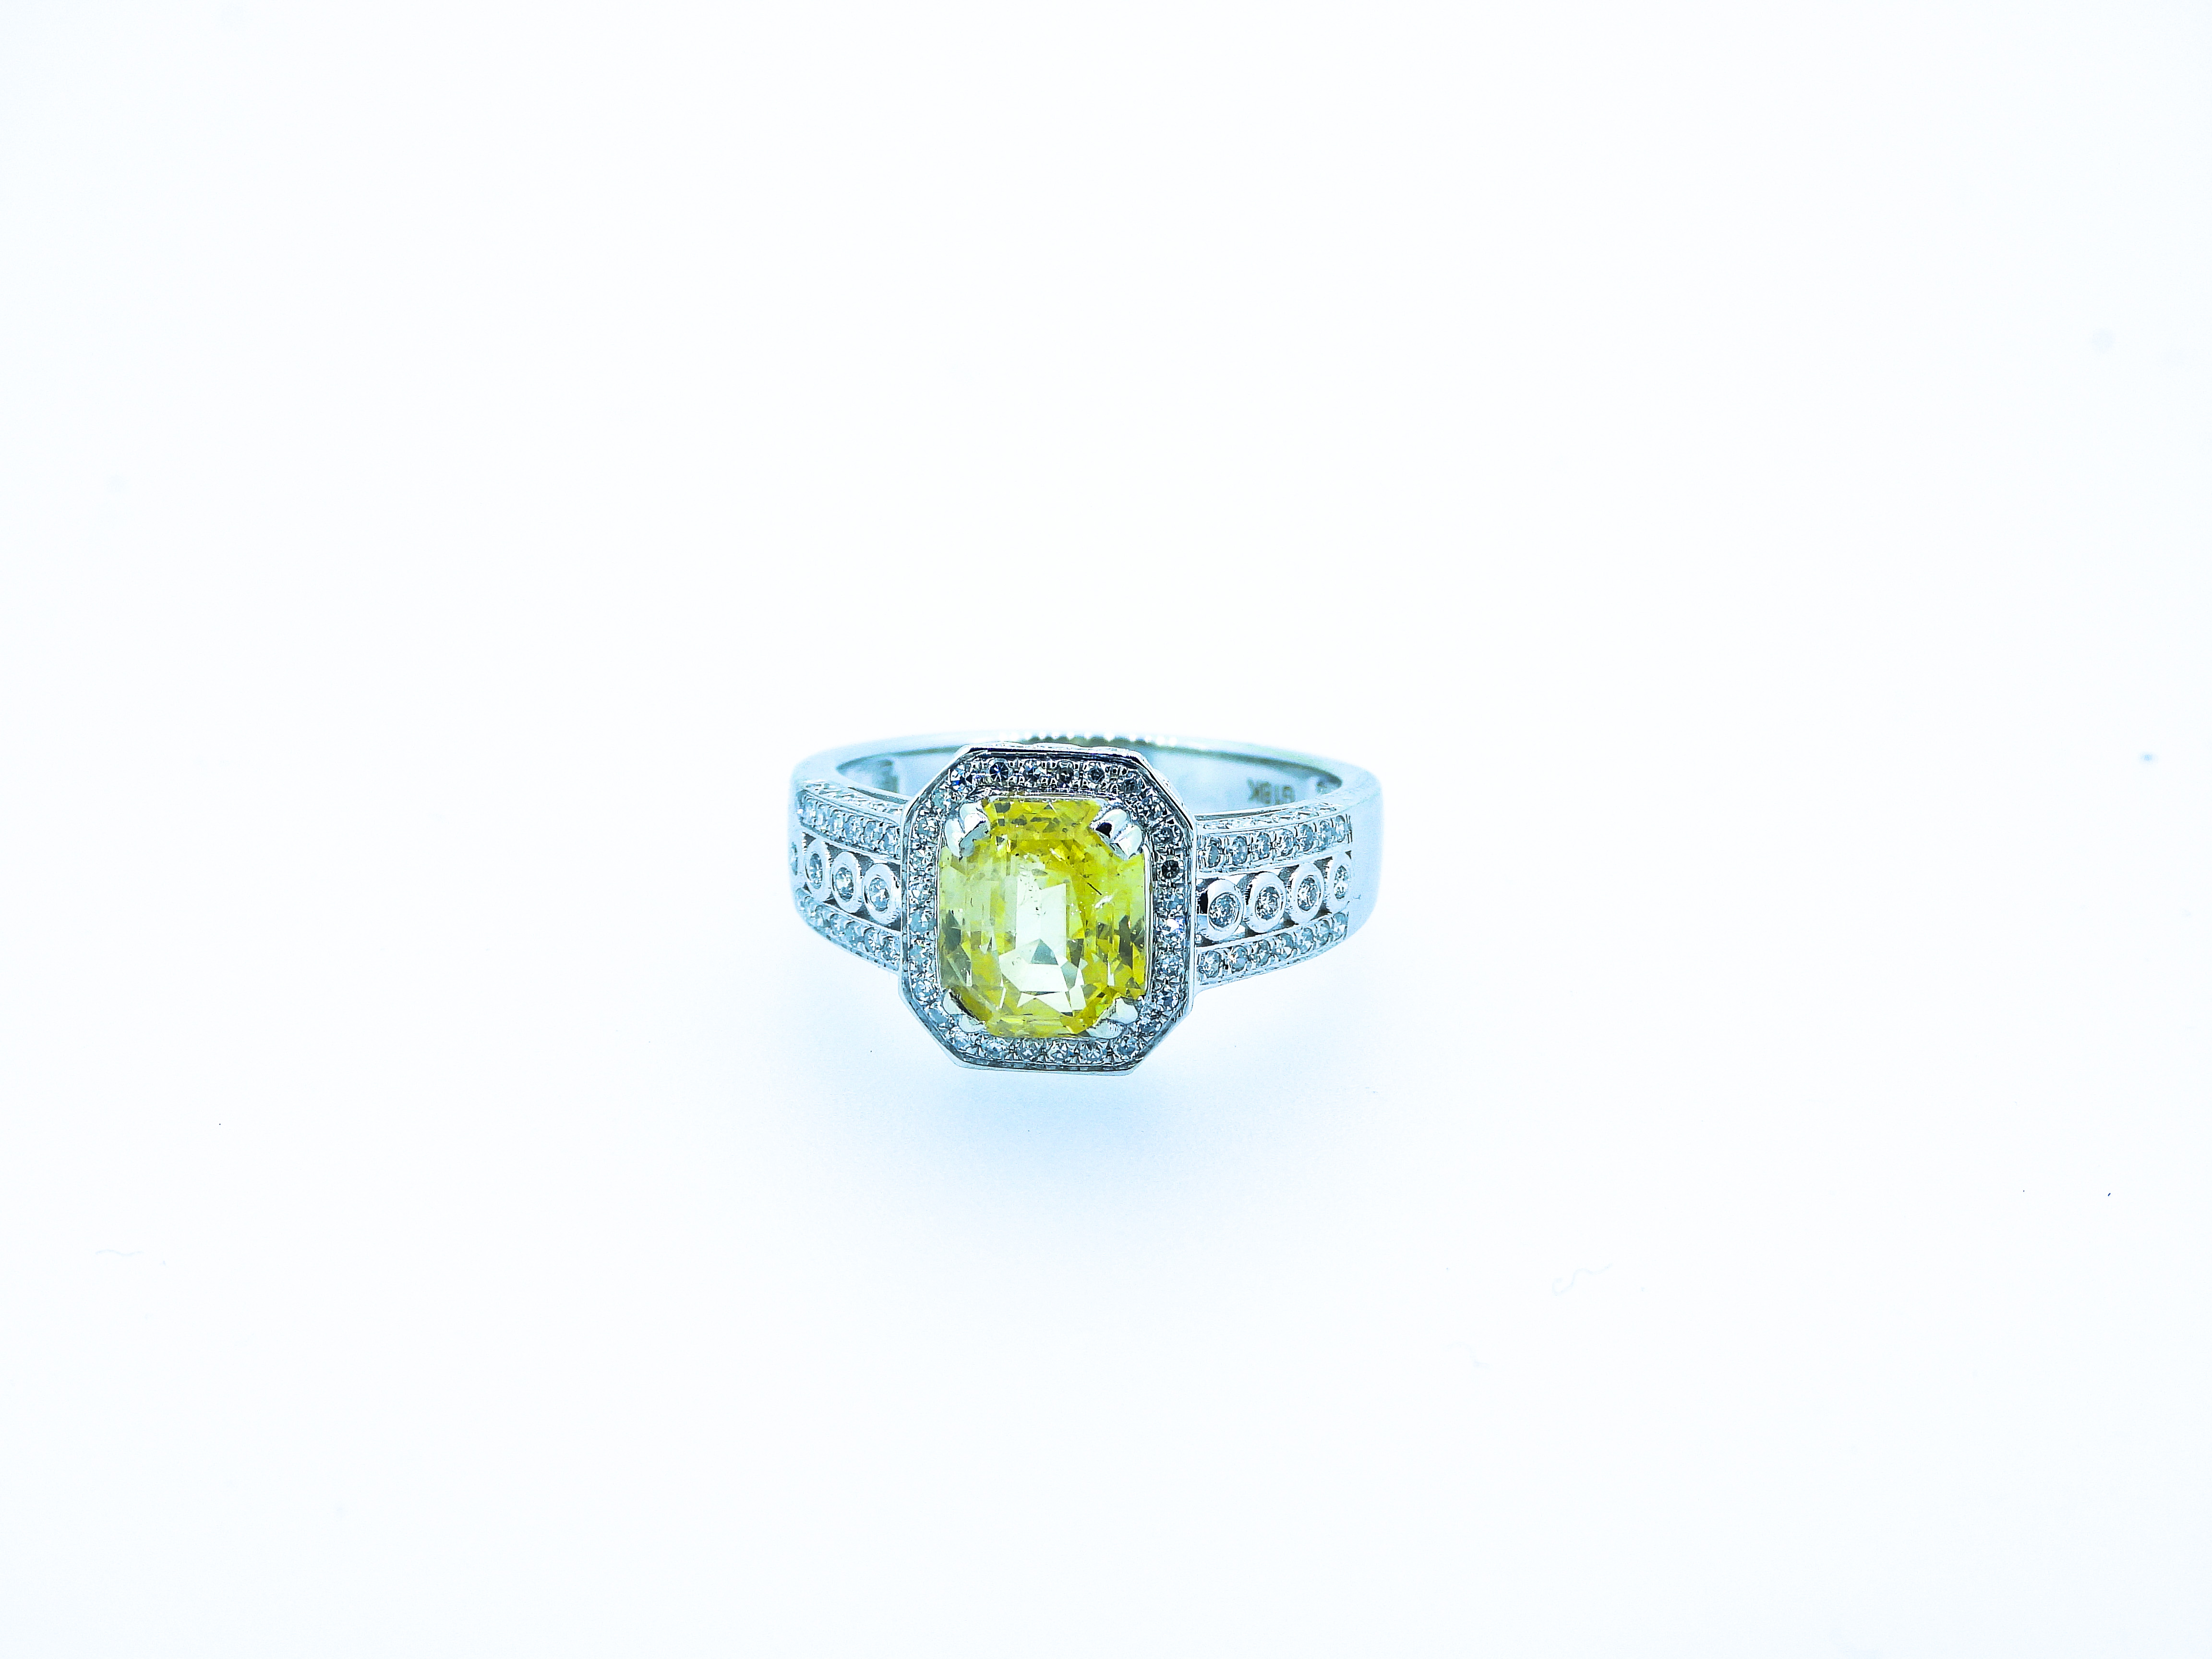 Certified 3.20 ct Yellow VVS Untreated Sapphire & Diamonds Ring - Image 7 of 7